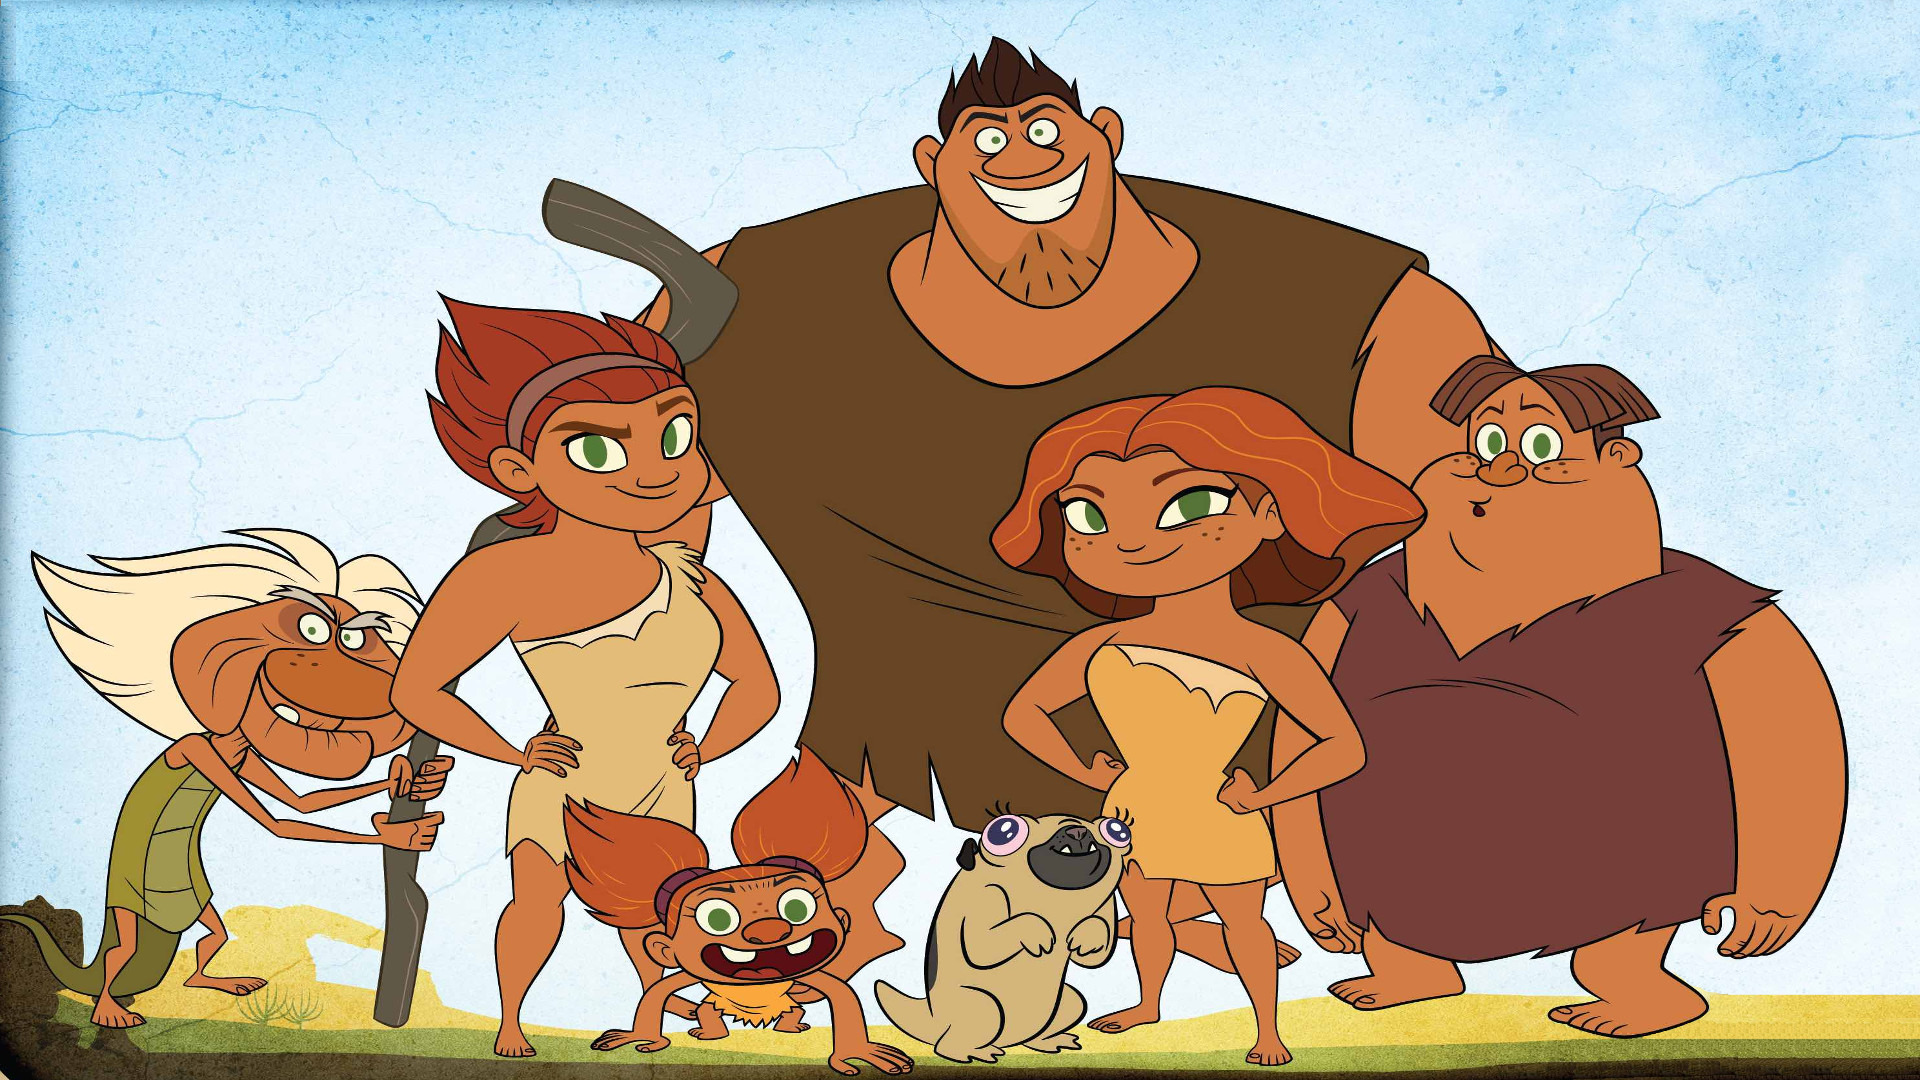 Show Dawn of the Croods